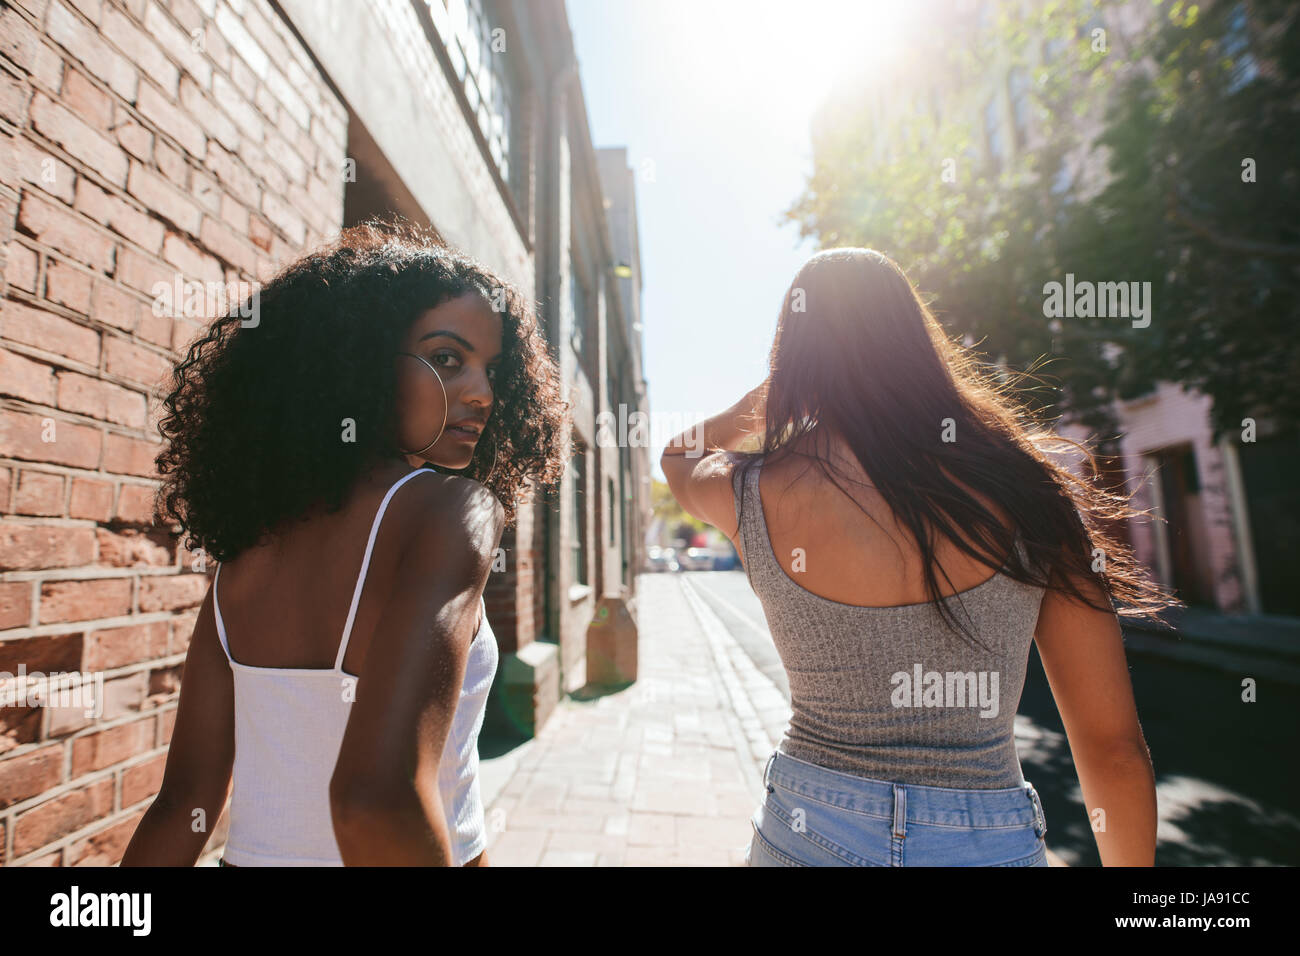 Rear view shot of young african woman looking over her shoulder while walking with her friend on city street. Two young women walking together outdoor Stock Photo